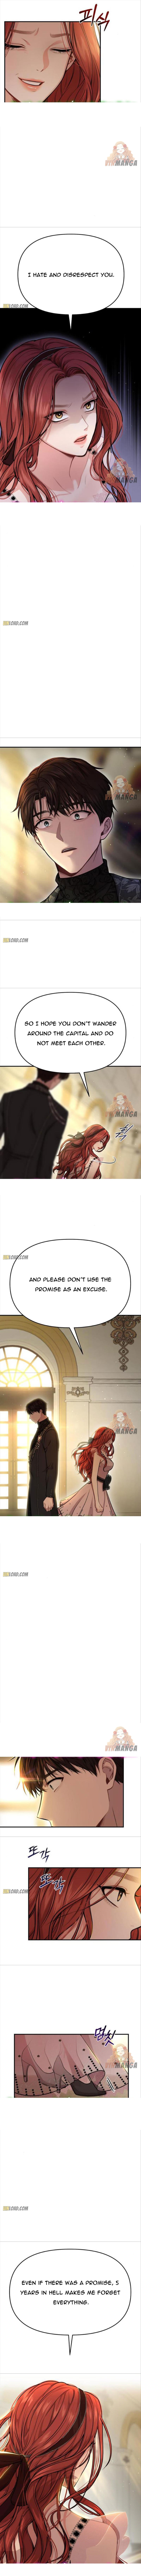 The Secret Bedroom of a Dejected Royal Daughter Chapter 13 - page 8